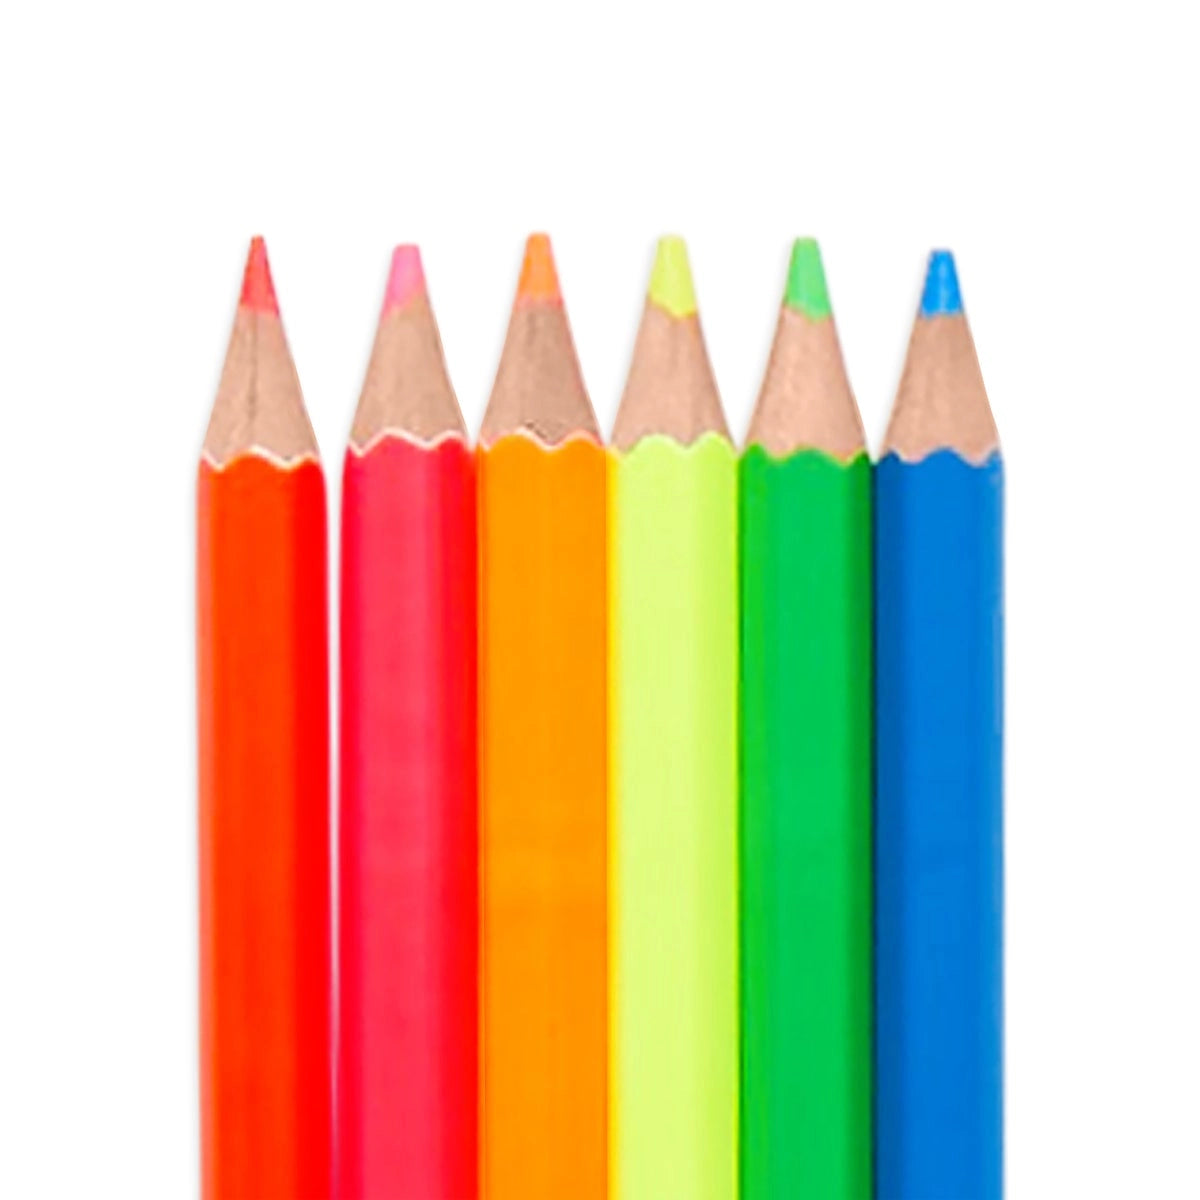 Ooly Jumbo Brights Neon Colored Pencils - Set of 6 | Prelude & Dawn | Los Angeles